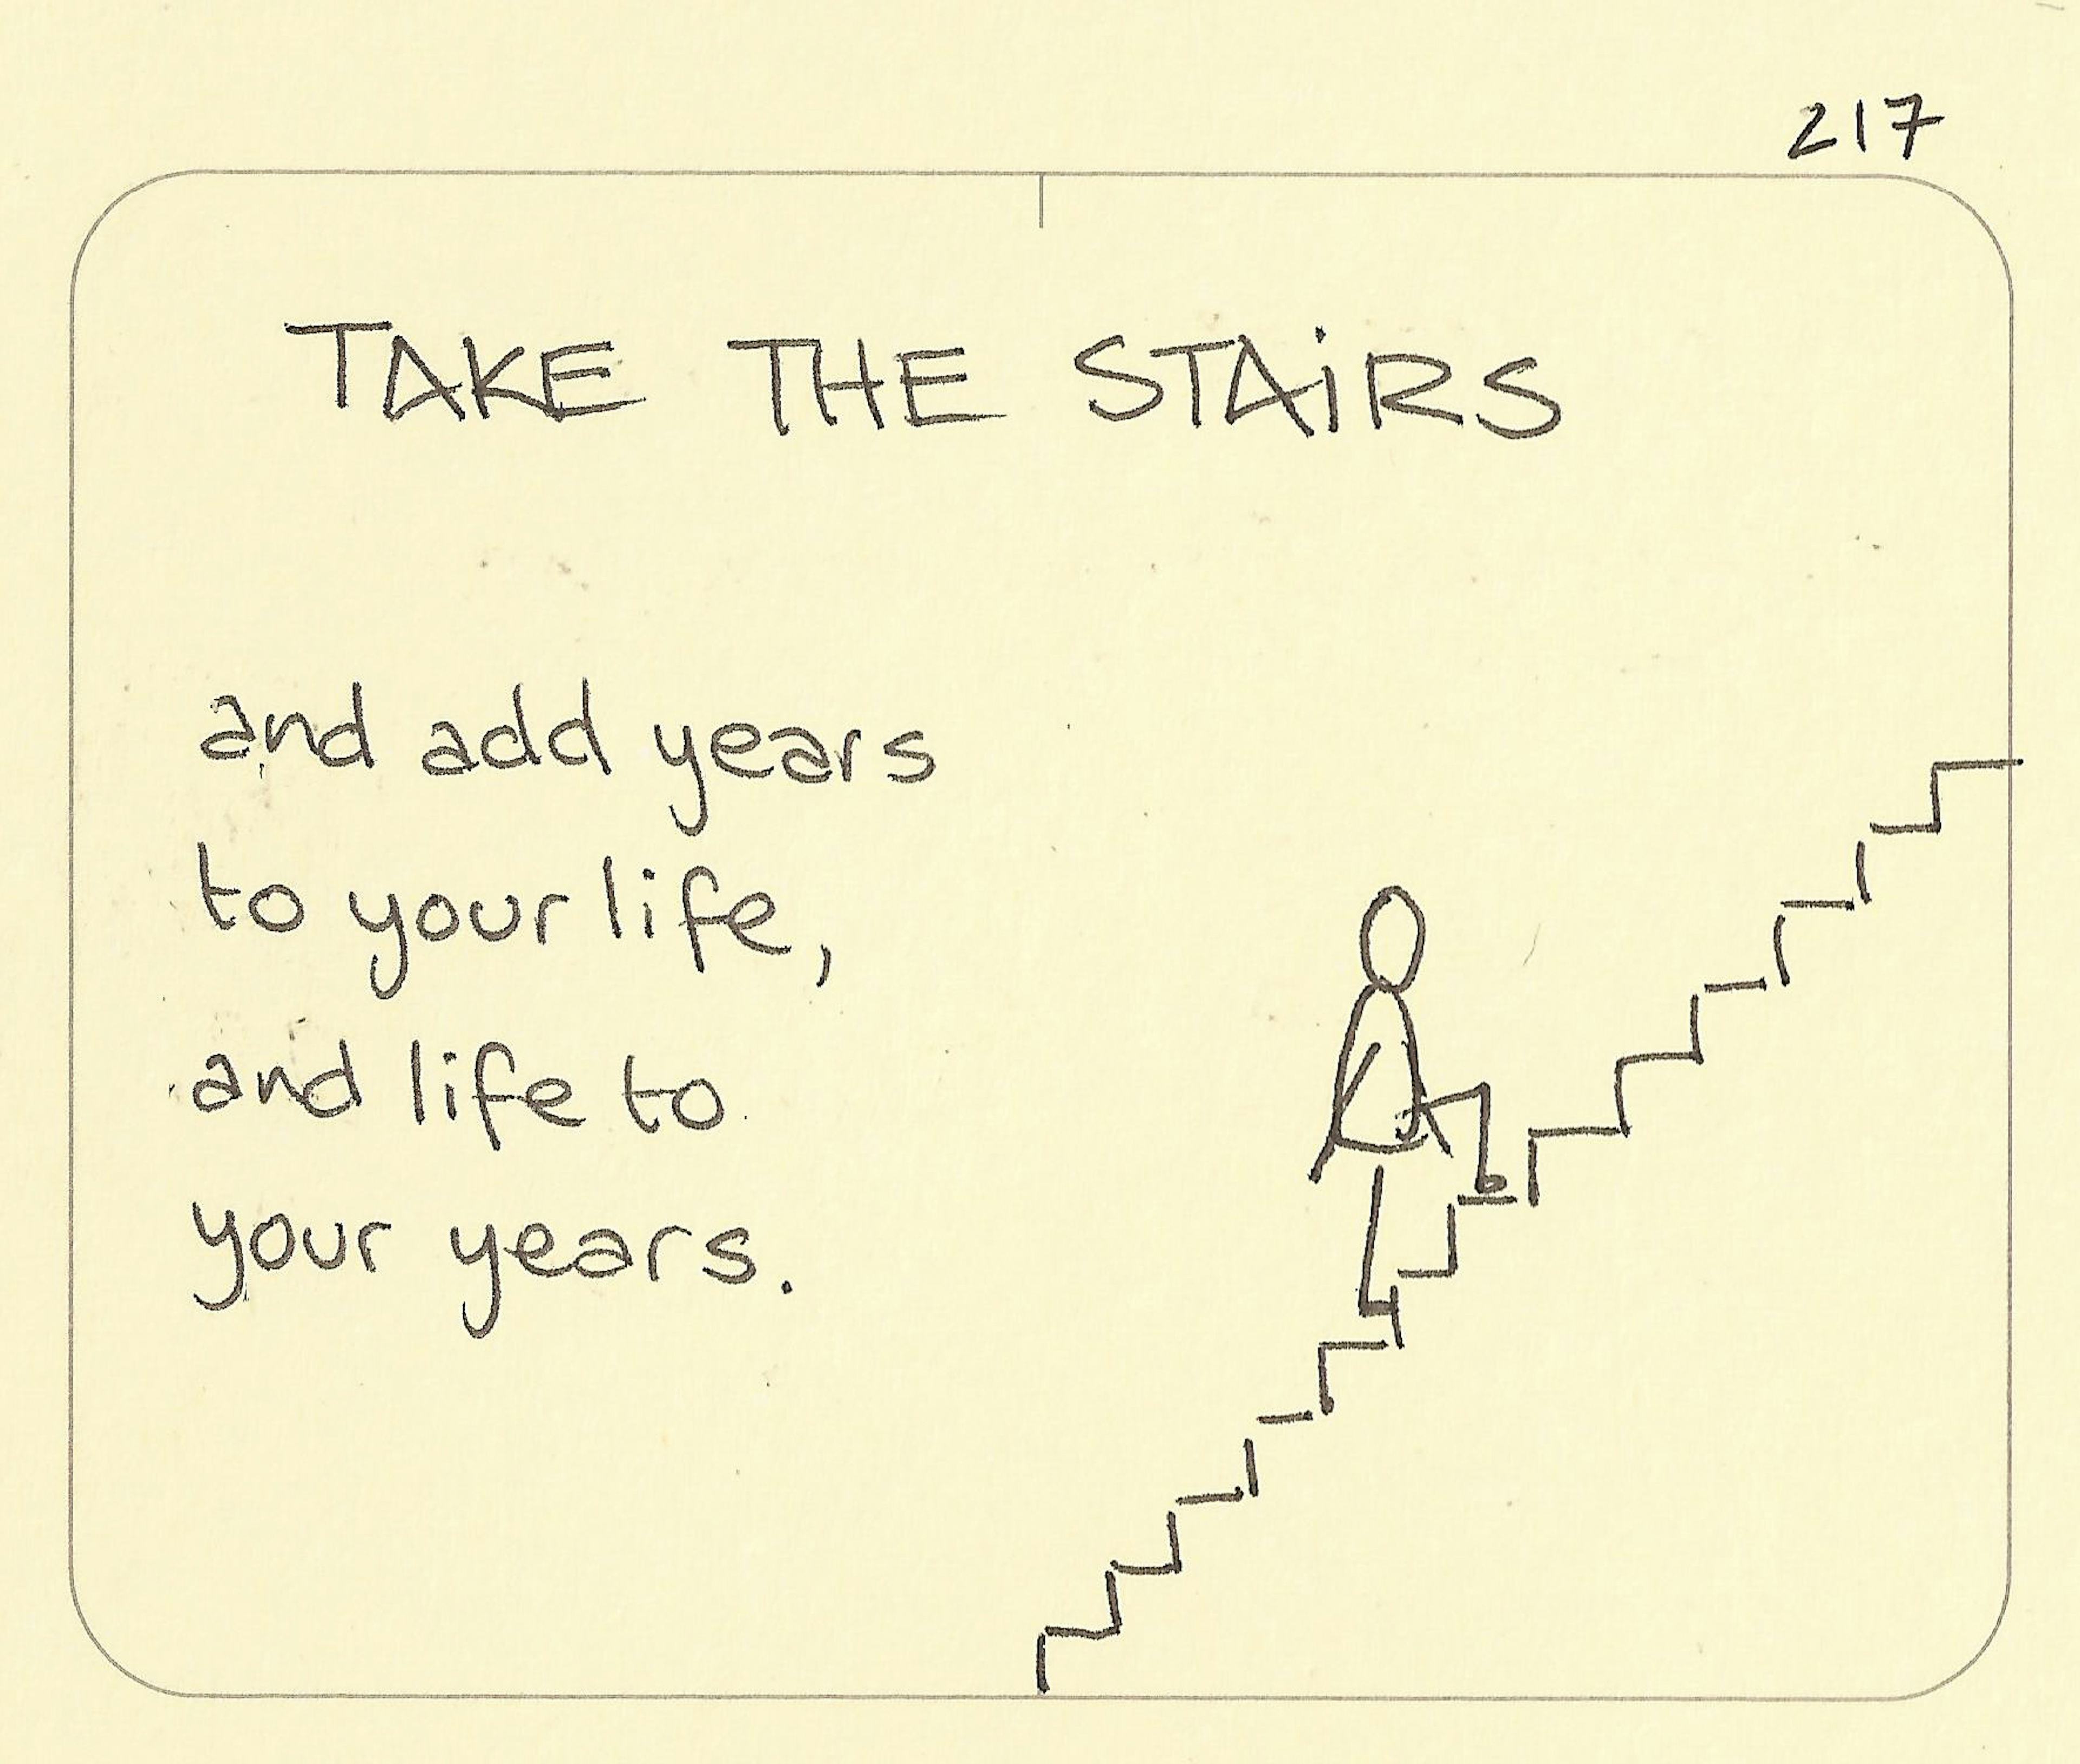 Take the stairs - Sketchplanations